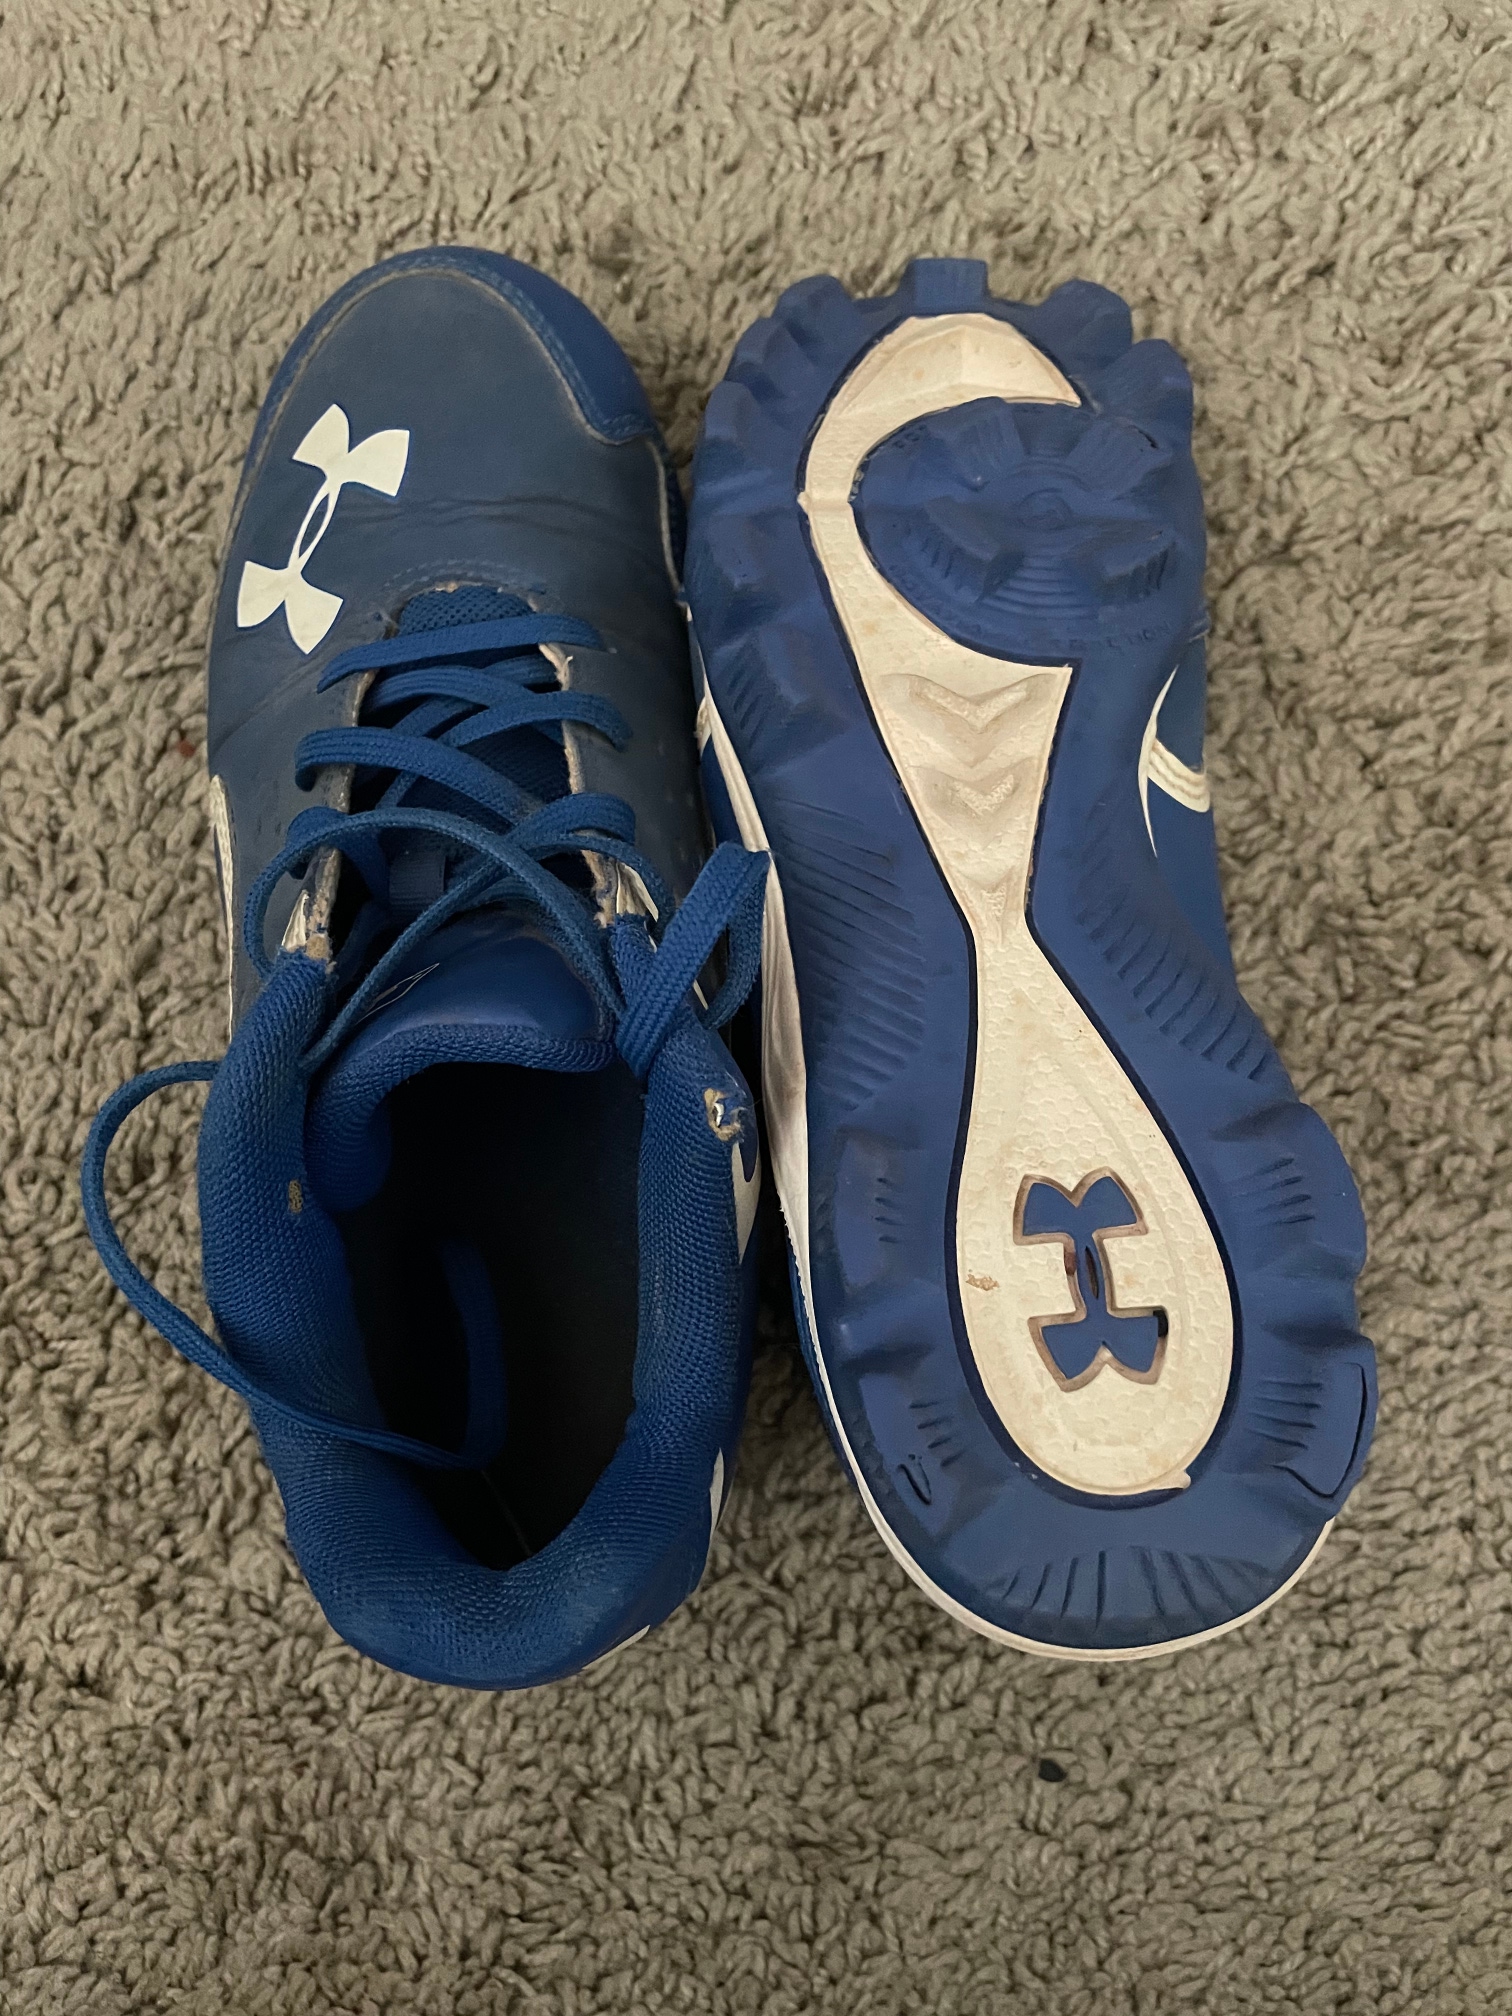 Blue Youth Used Size 3.0 (Women's 4.0) Under Armour Cleats